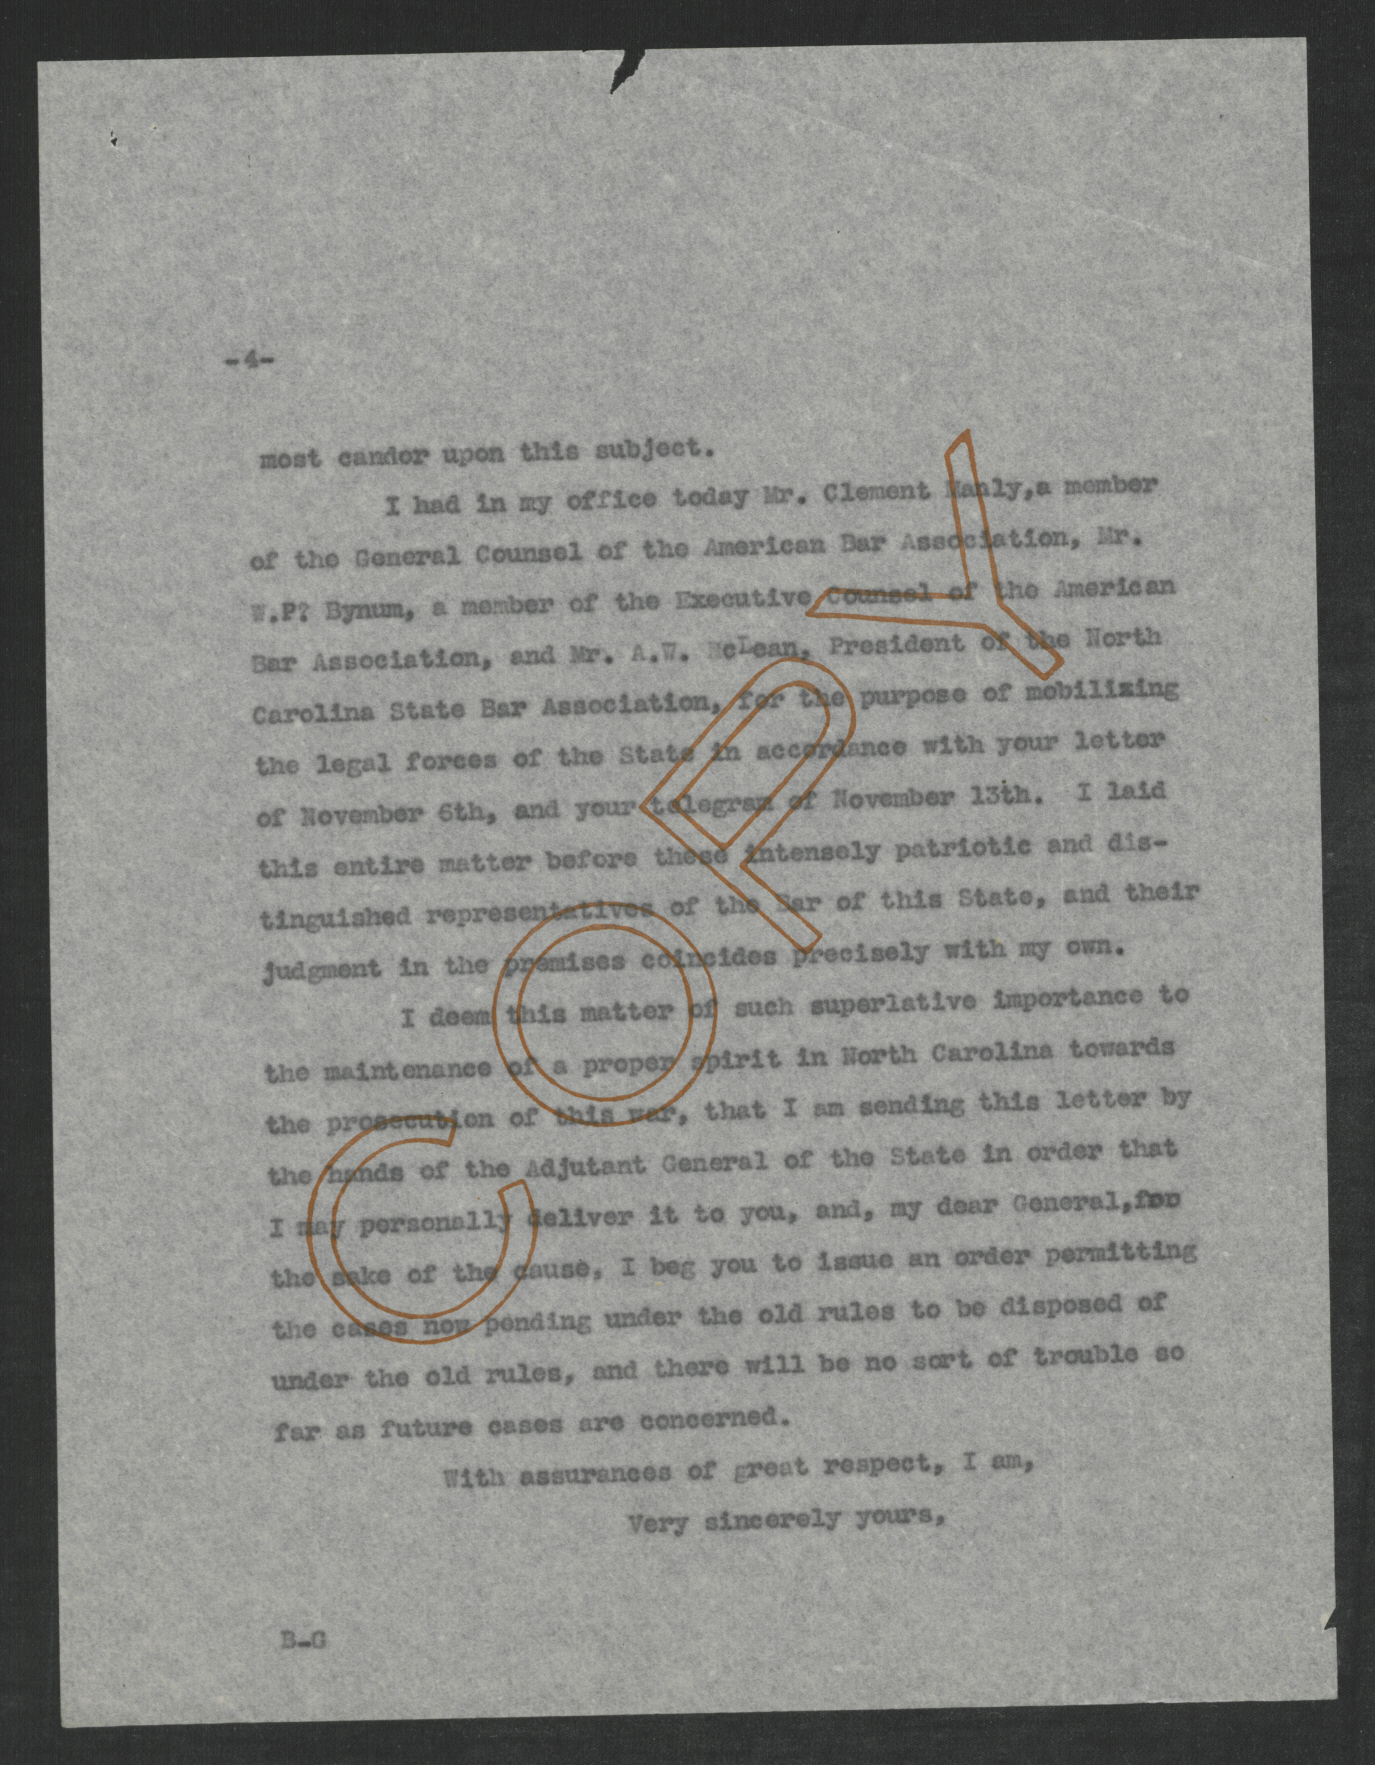 Letter from Thomas W. Bickett to Enoch H. Crowder, November 15, 1917, page 4